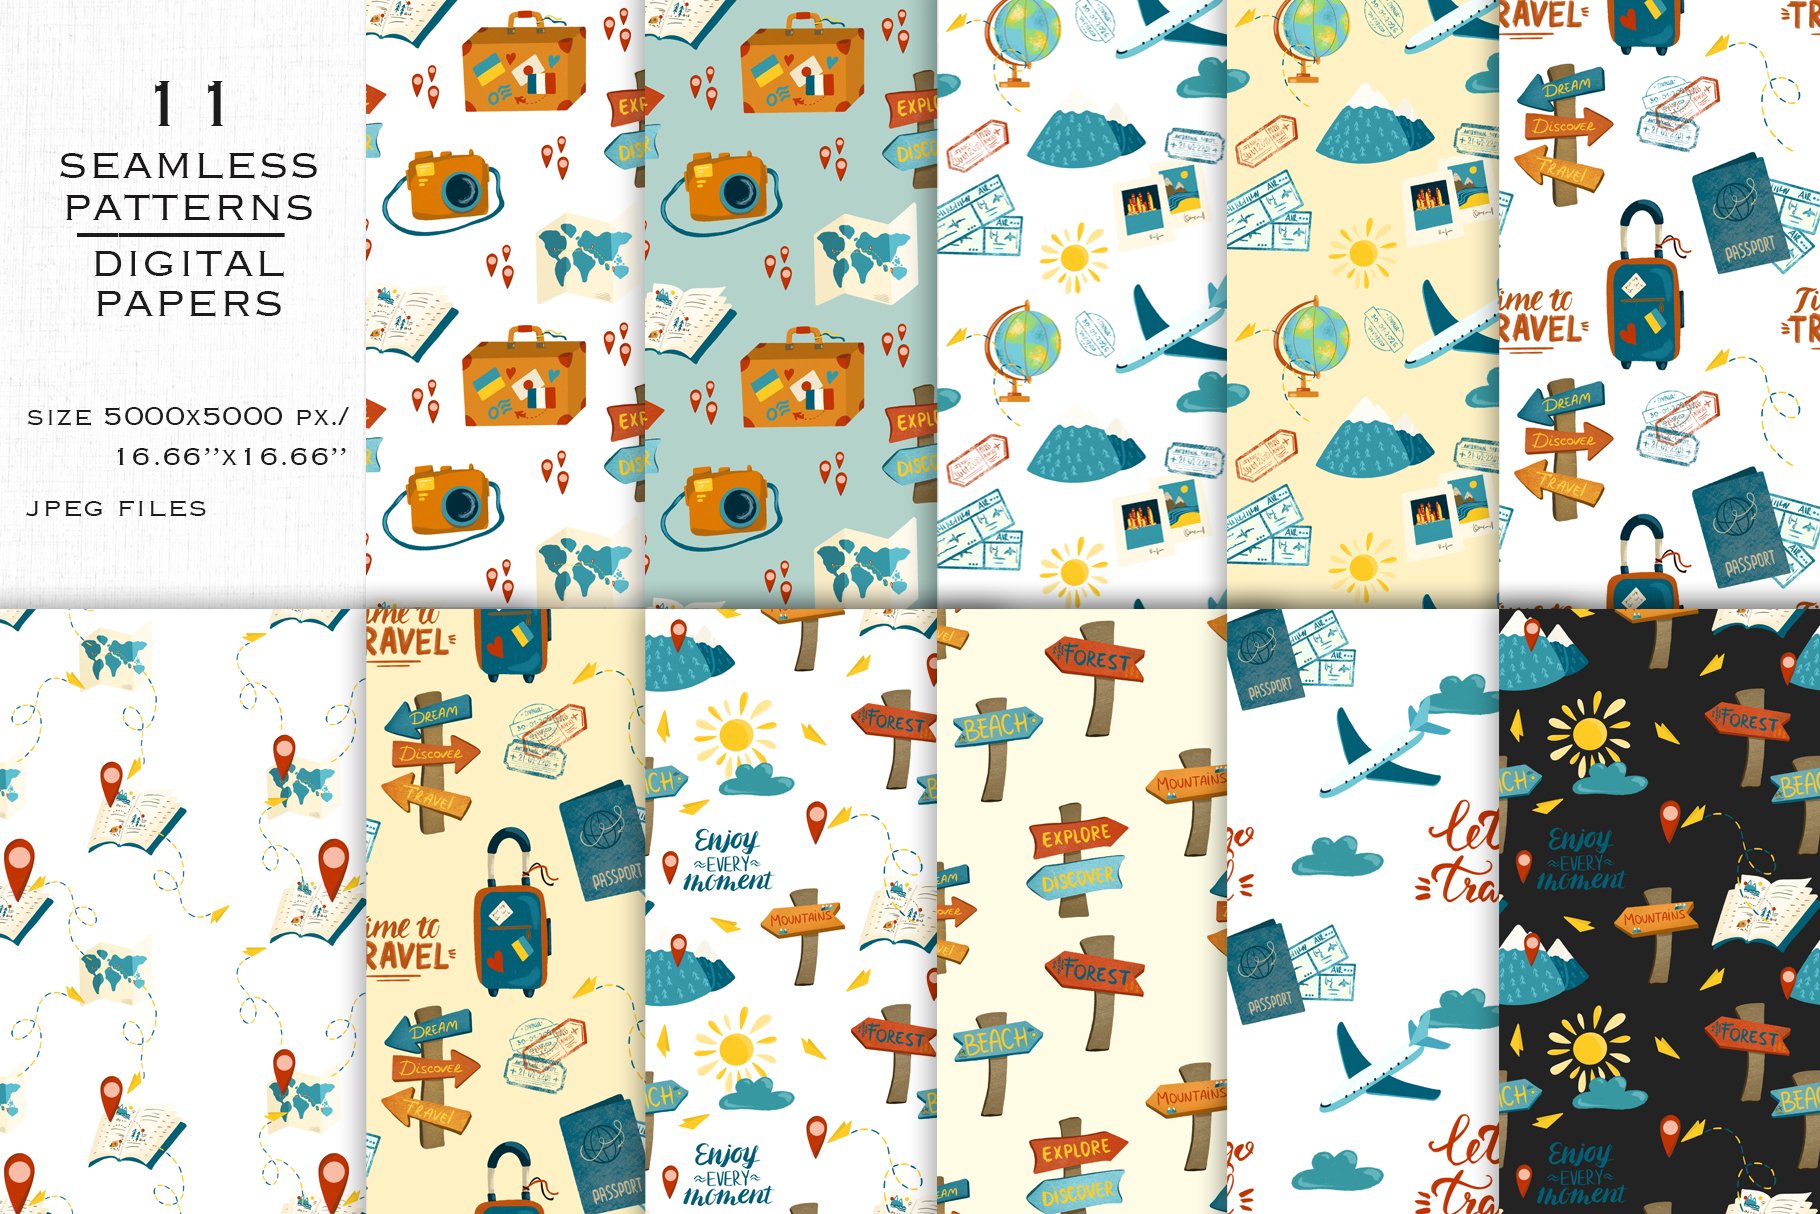 Nice travel patterns collection.